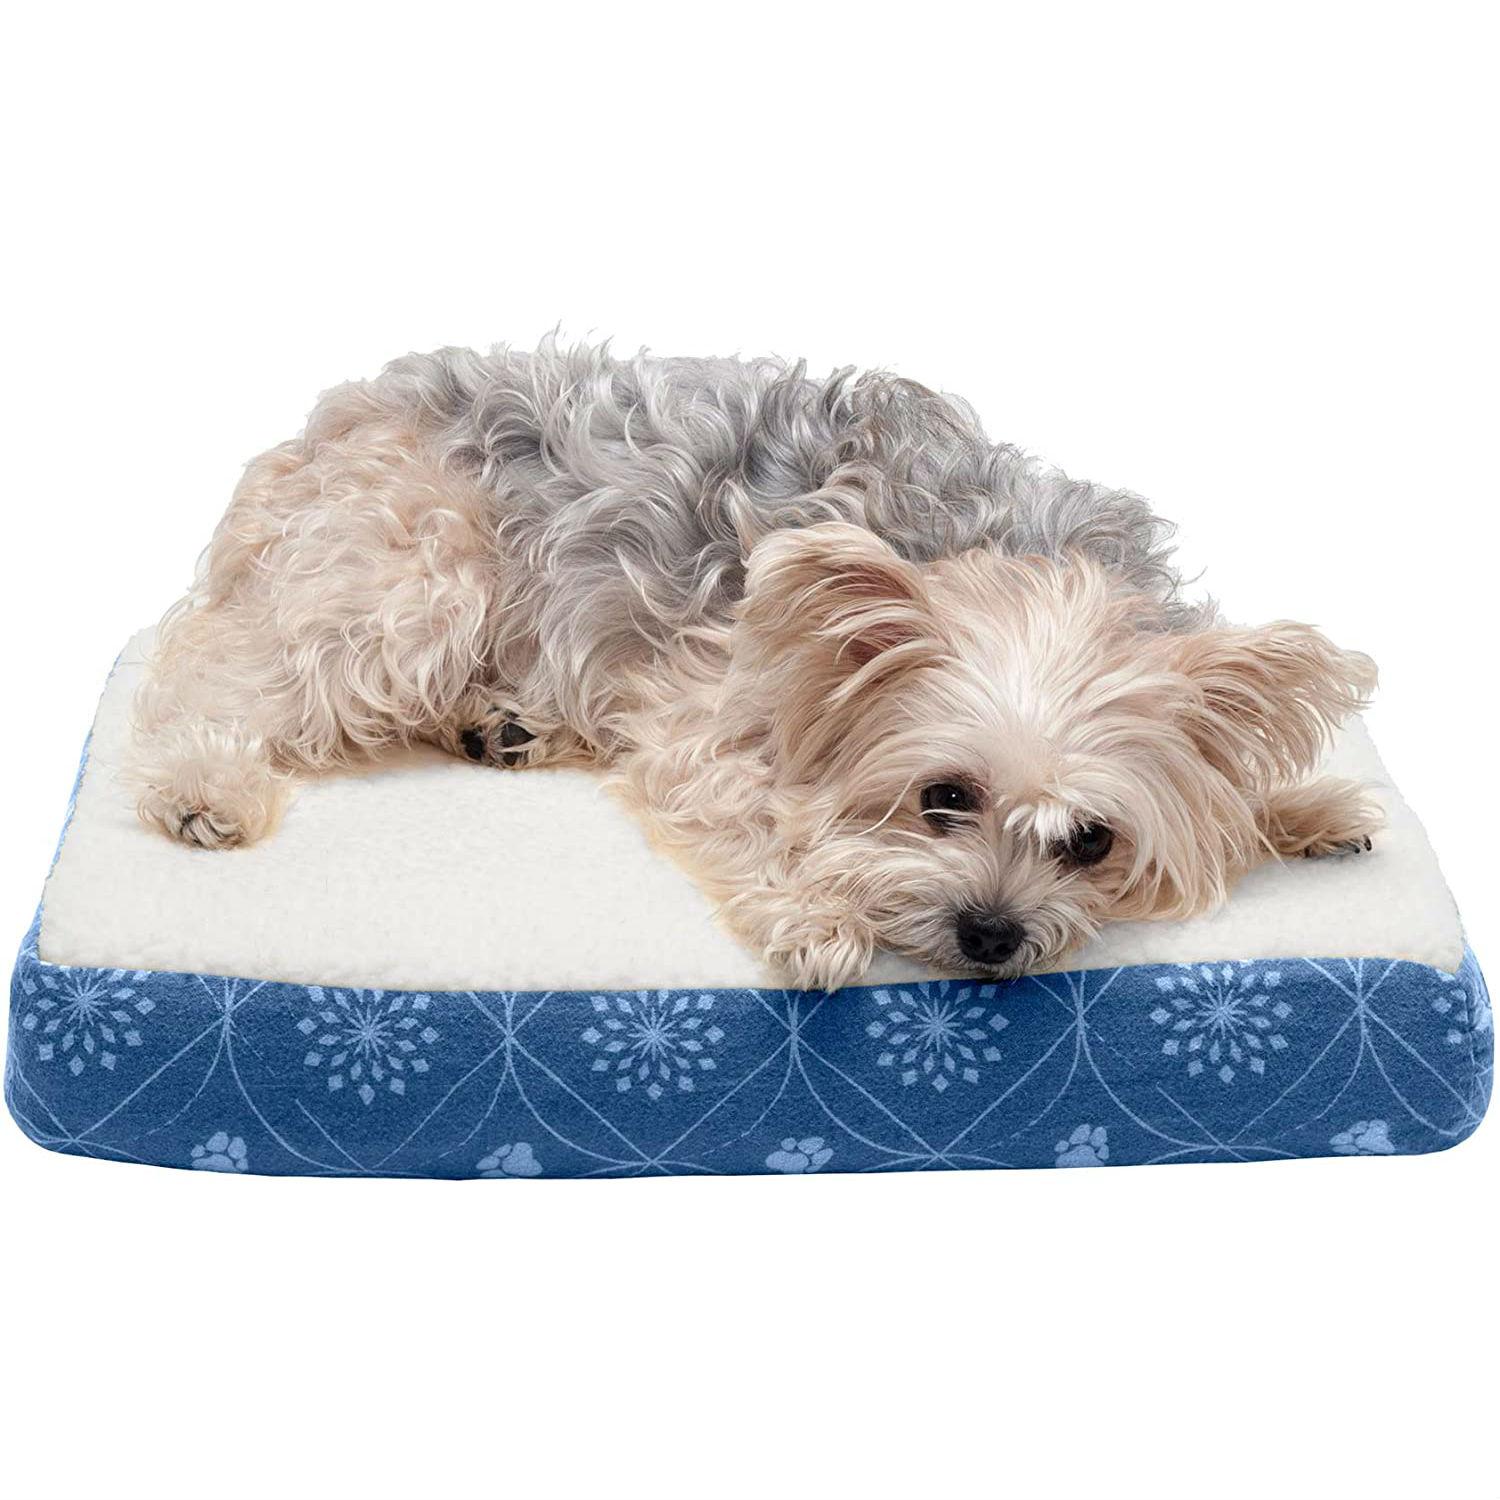 FurHaven Paw Decor Deluxe Cooling Gel Top Pet Bed - Twilight Blue